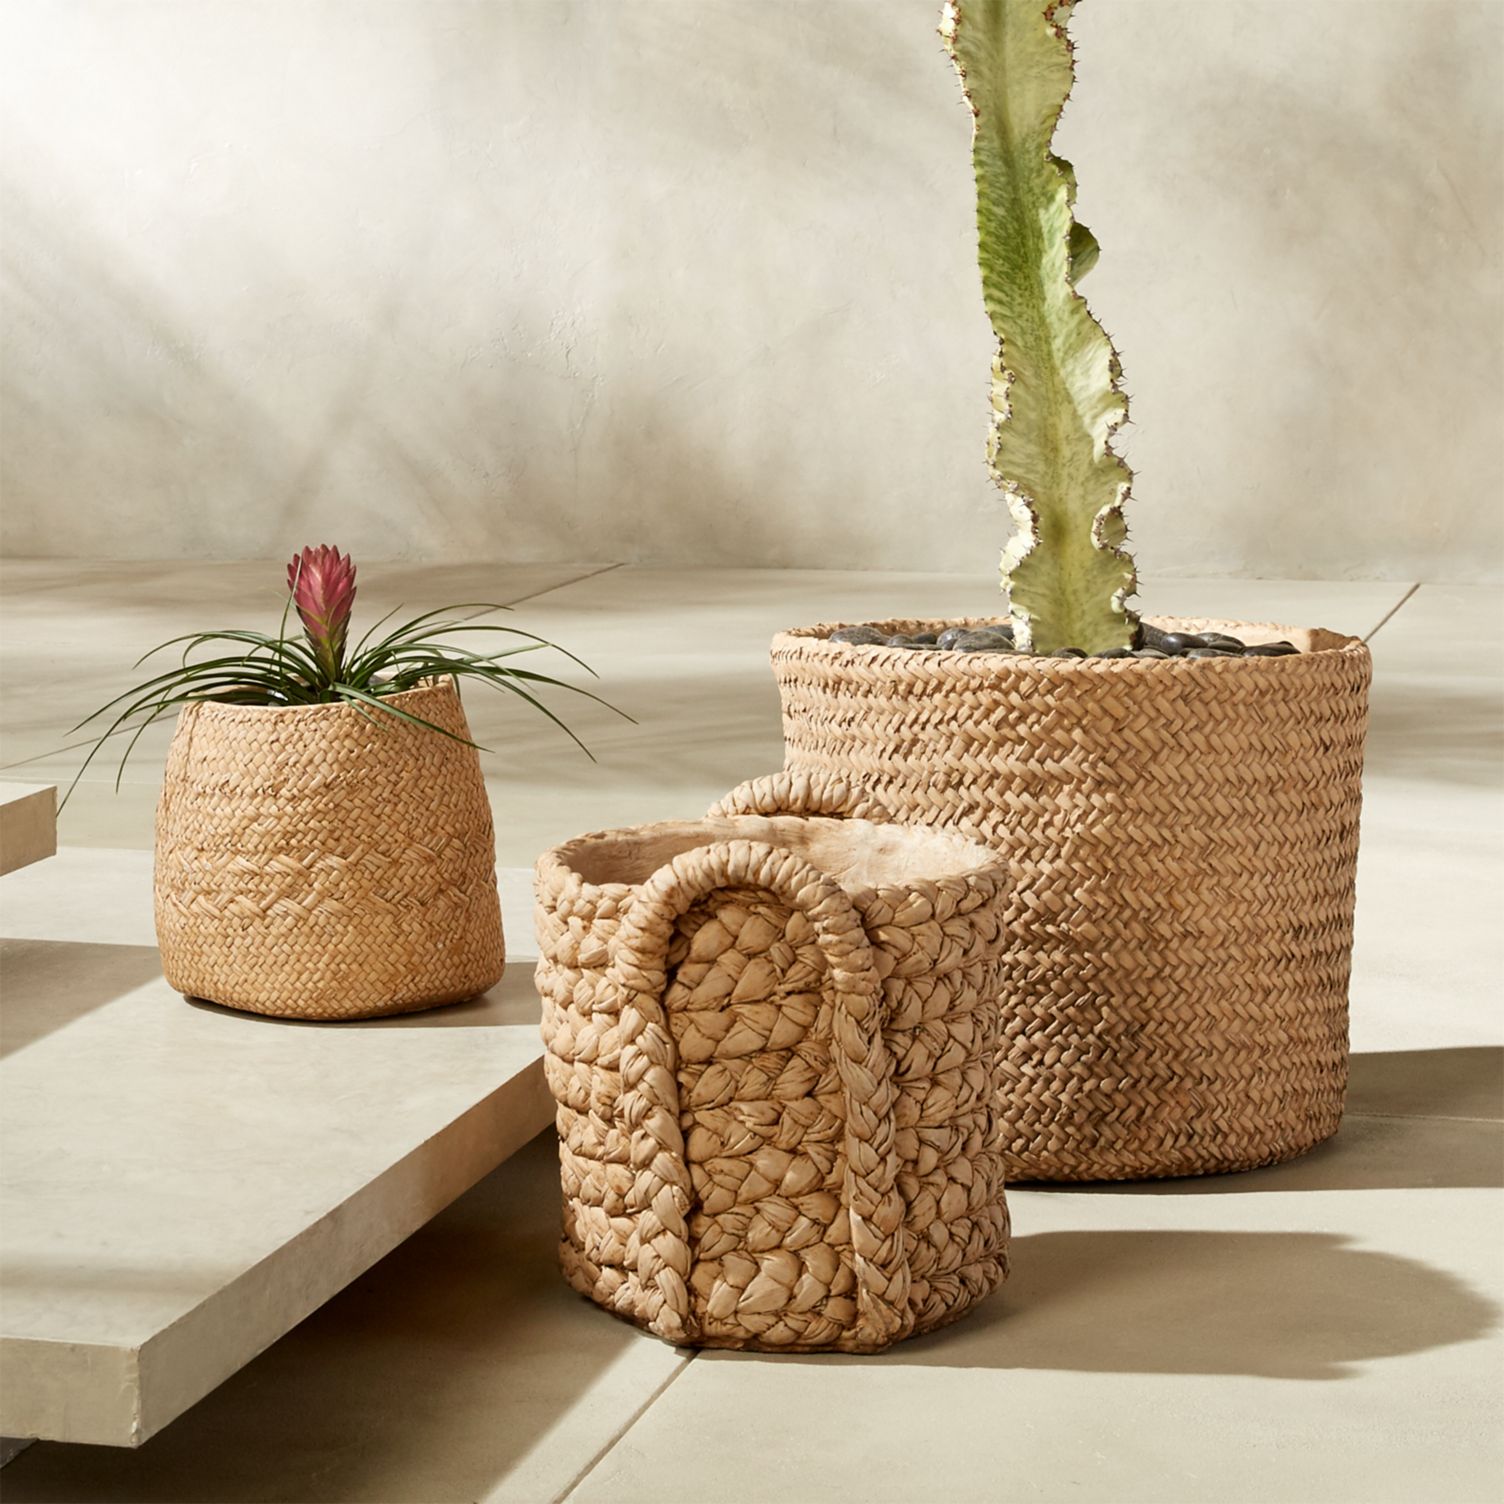 Cement planter baskets with a woven look